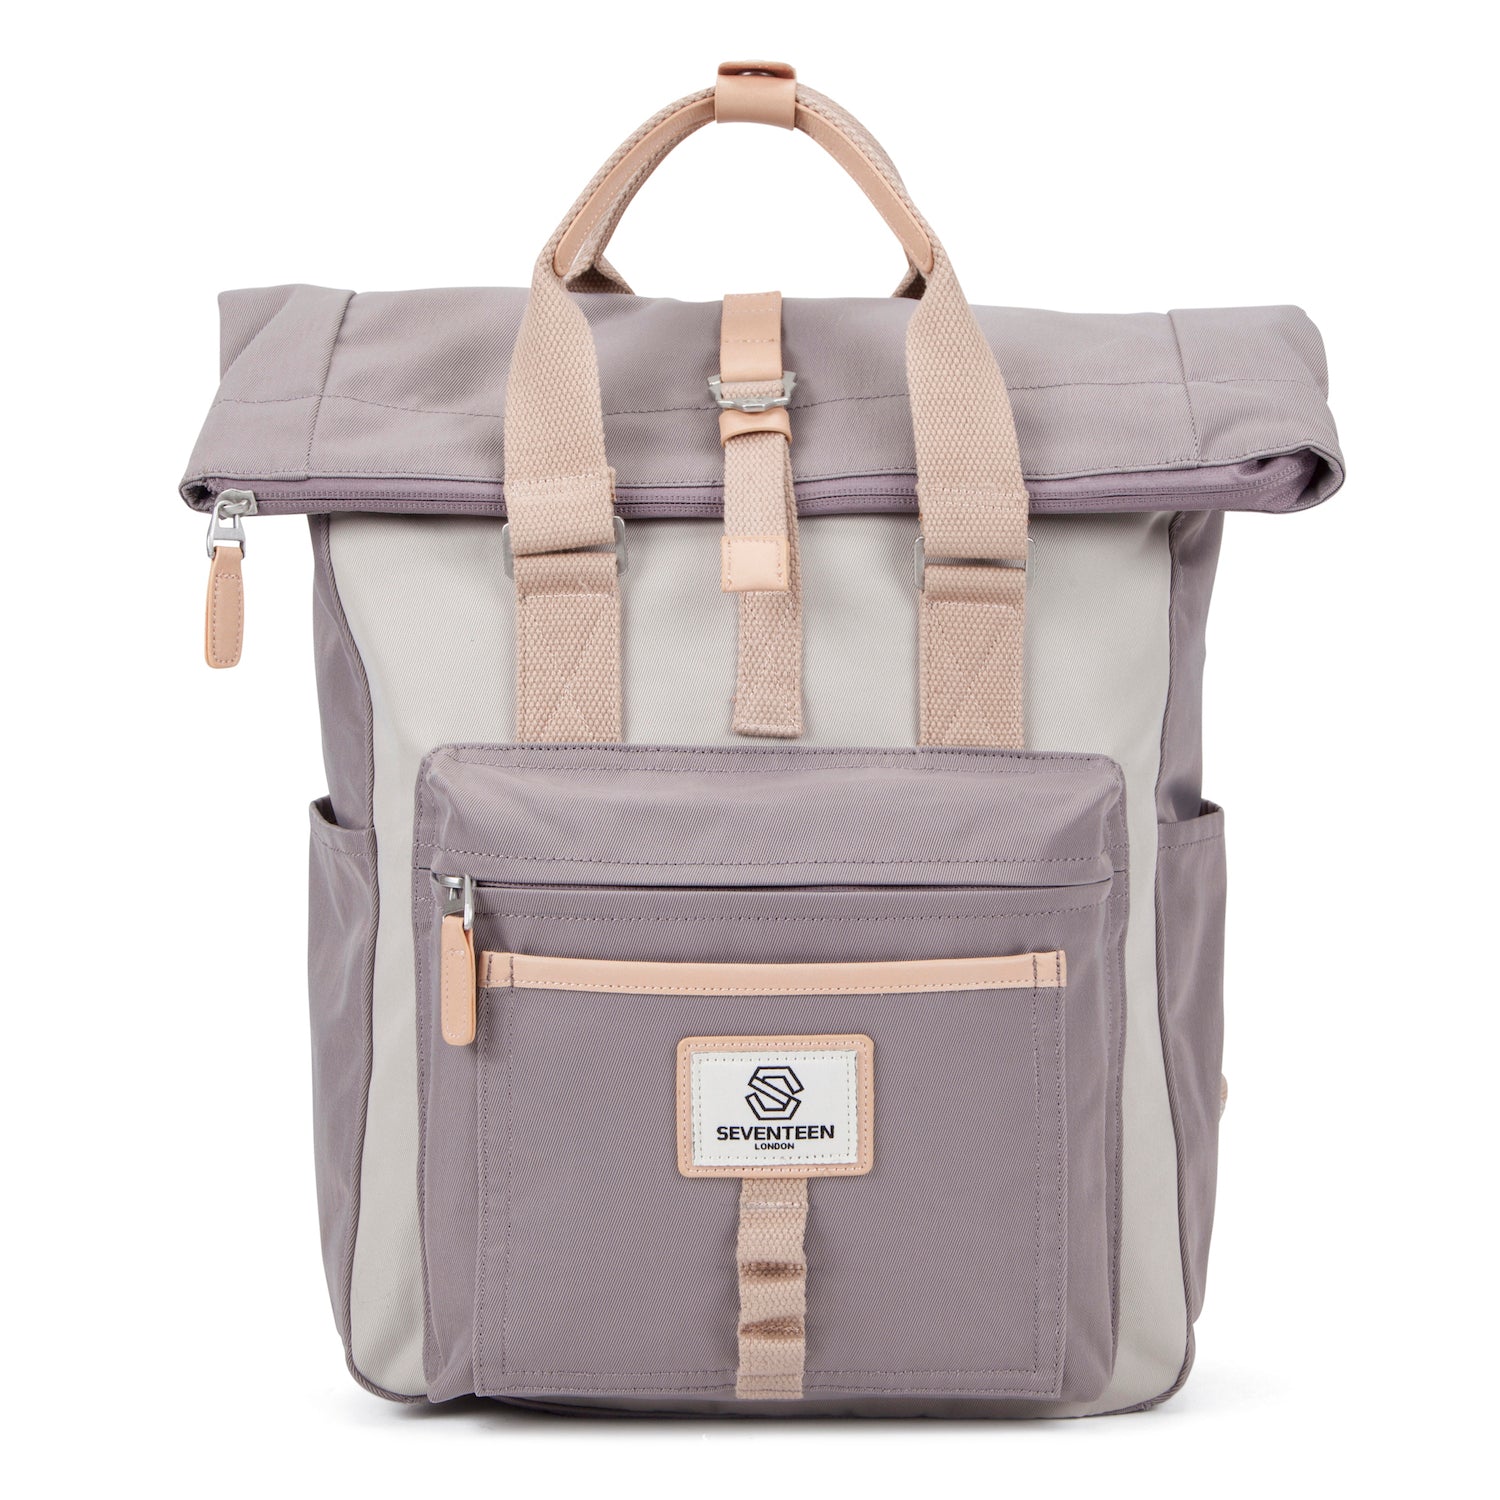 Canary Wharf Backpack - Grey with Cream